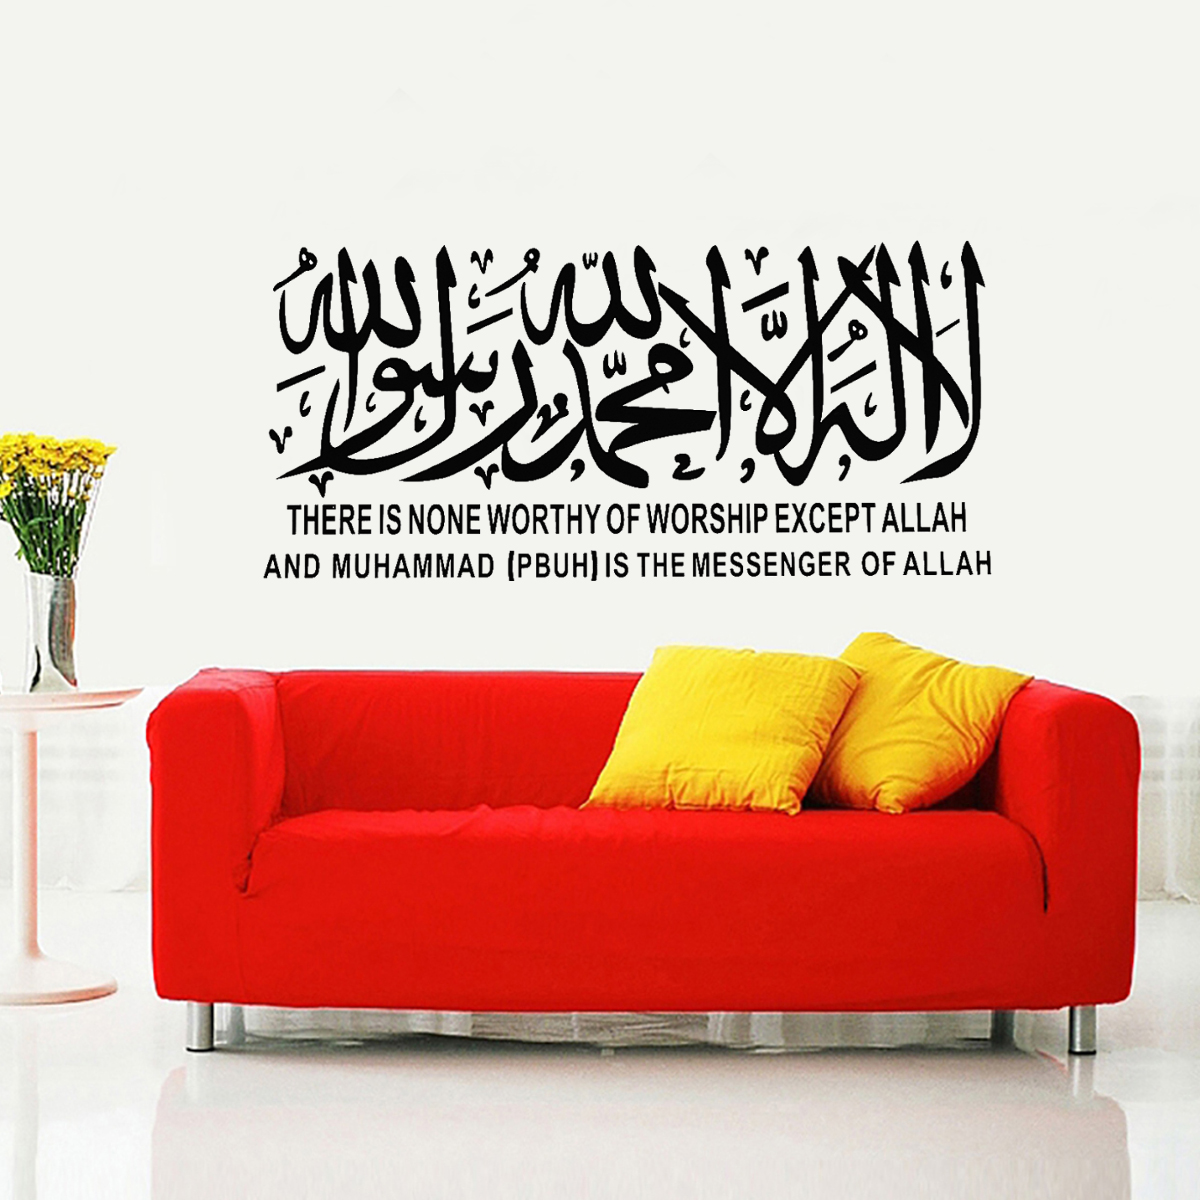 

PVC Islamic Muslim Mural Art Calligraphy Removable Wall Sticker Decal Home Decor